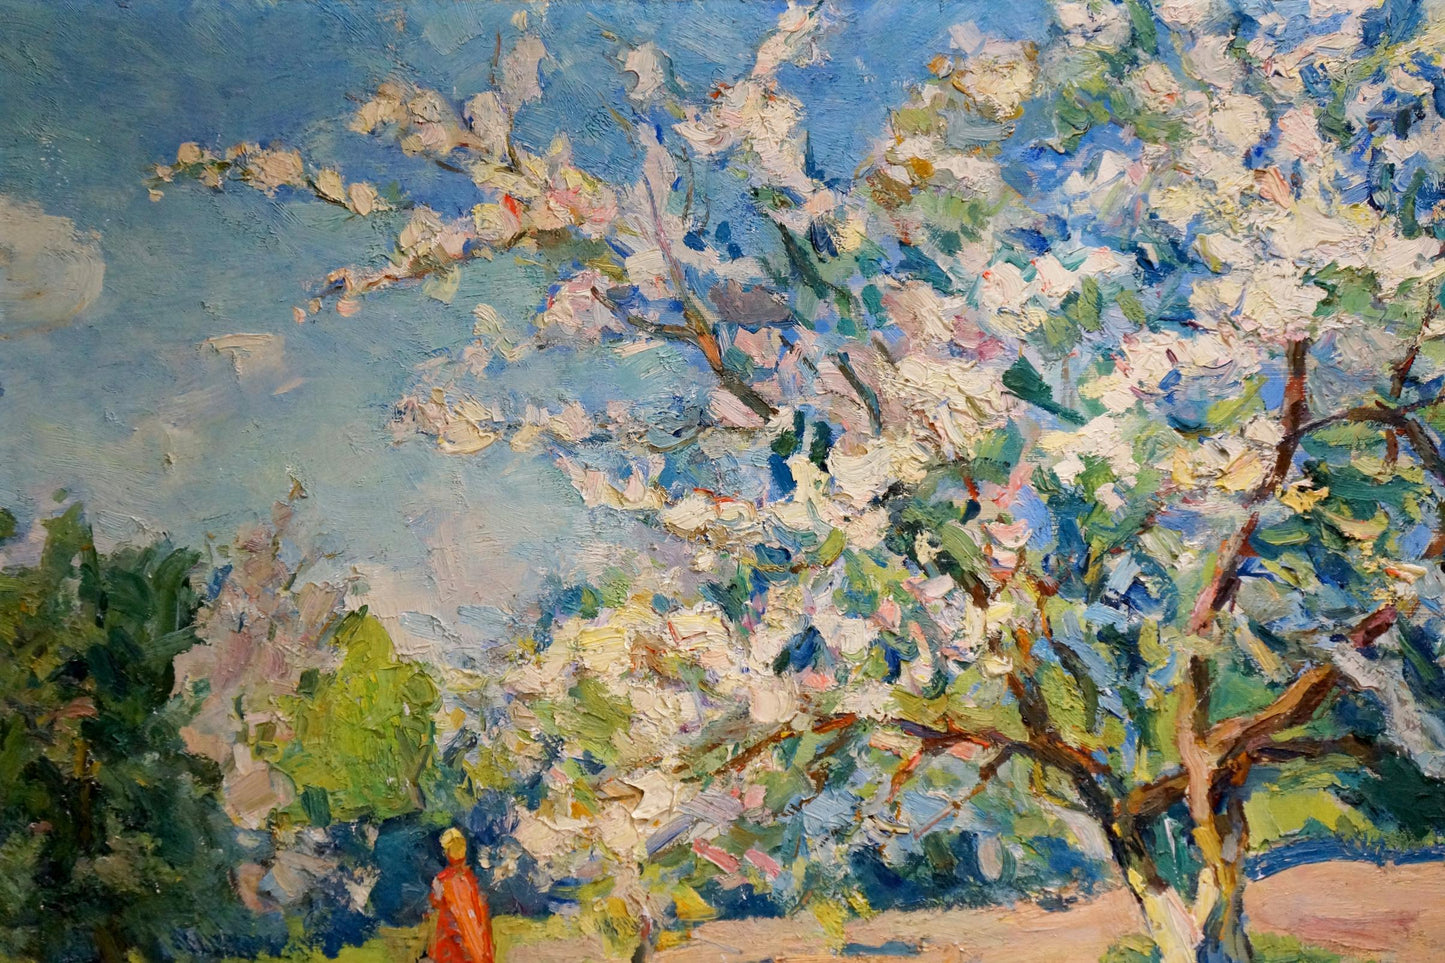 In the oil painting by Alexander Kerzhner, we see a garden in full bloom